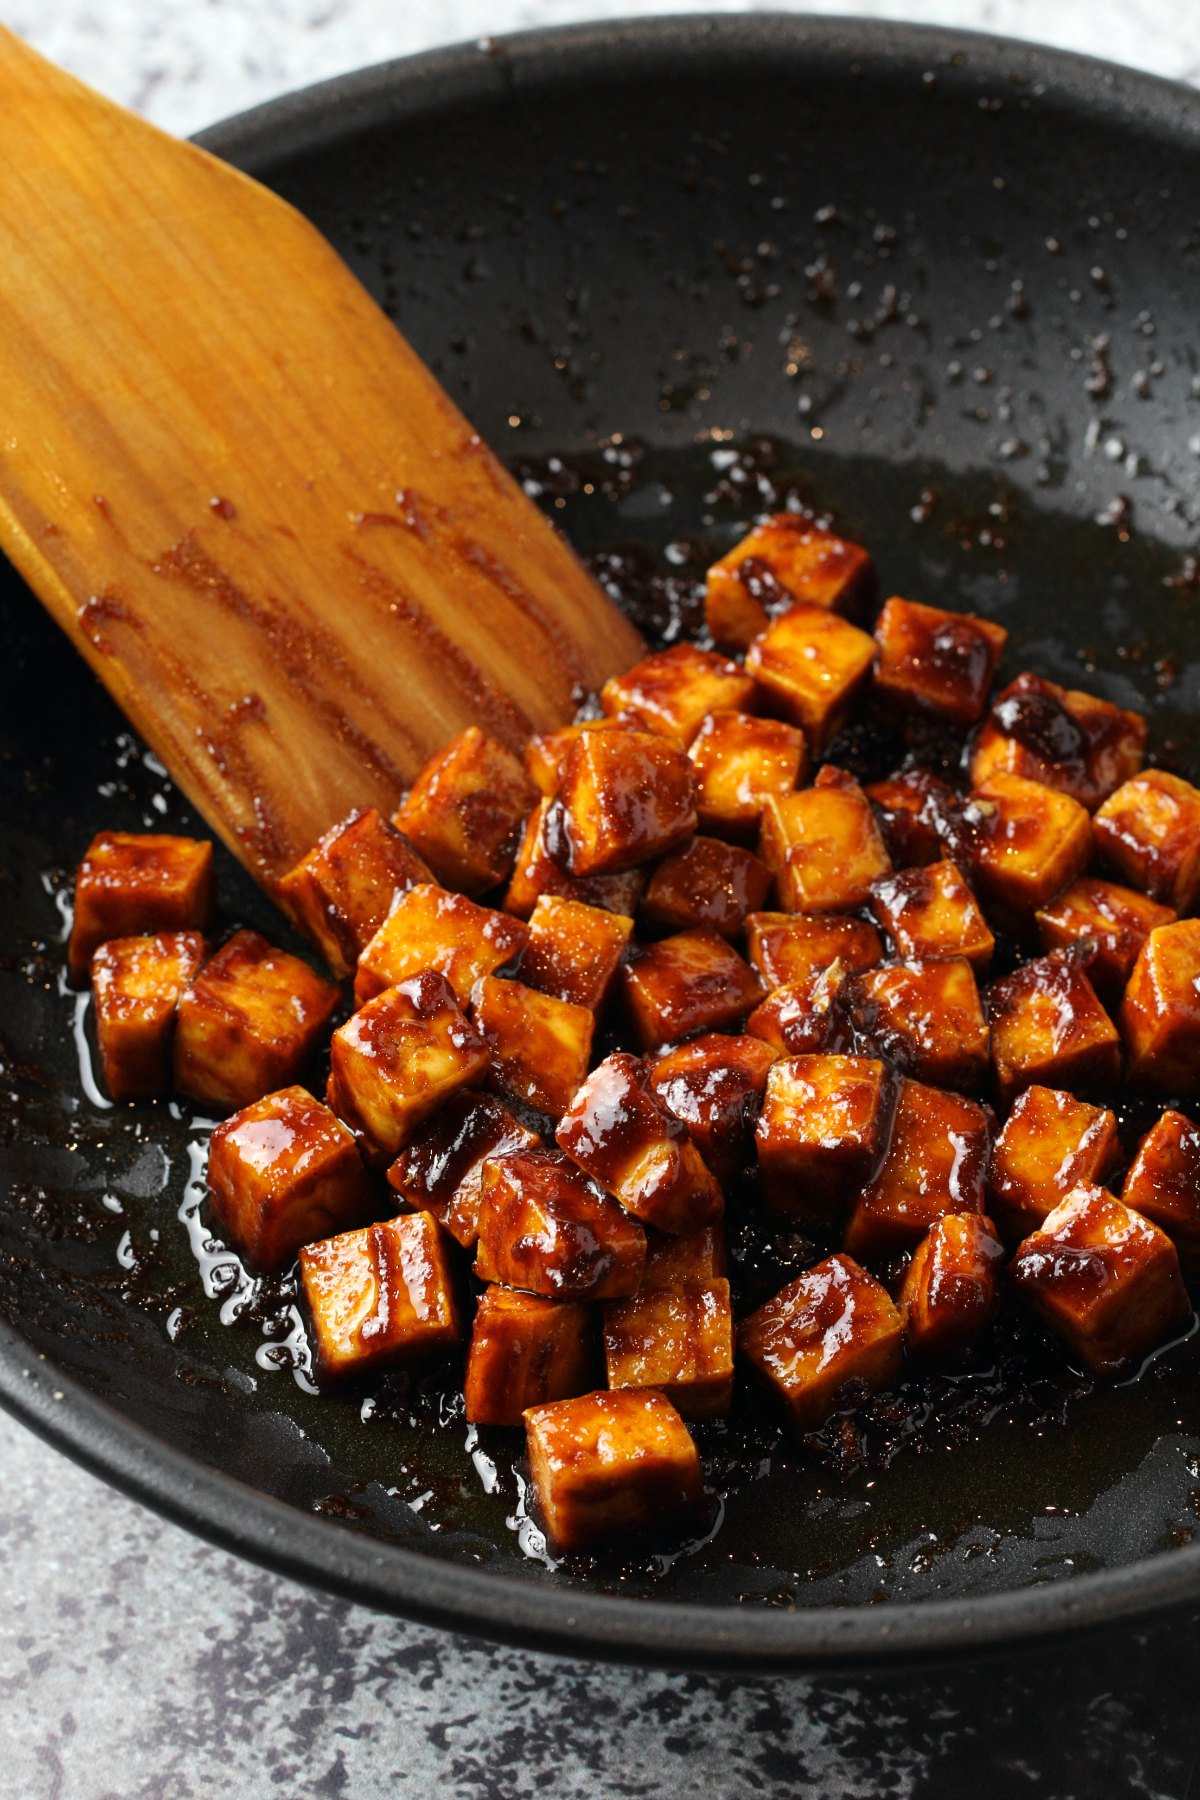 Fried tofu and sauce in a pan.